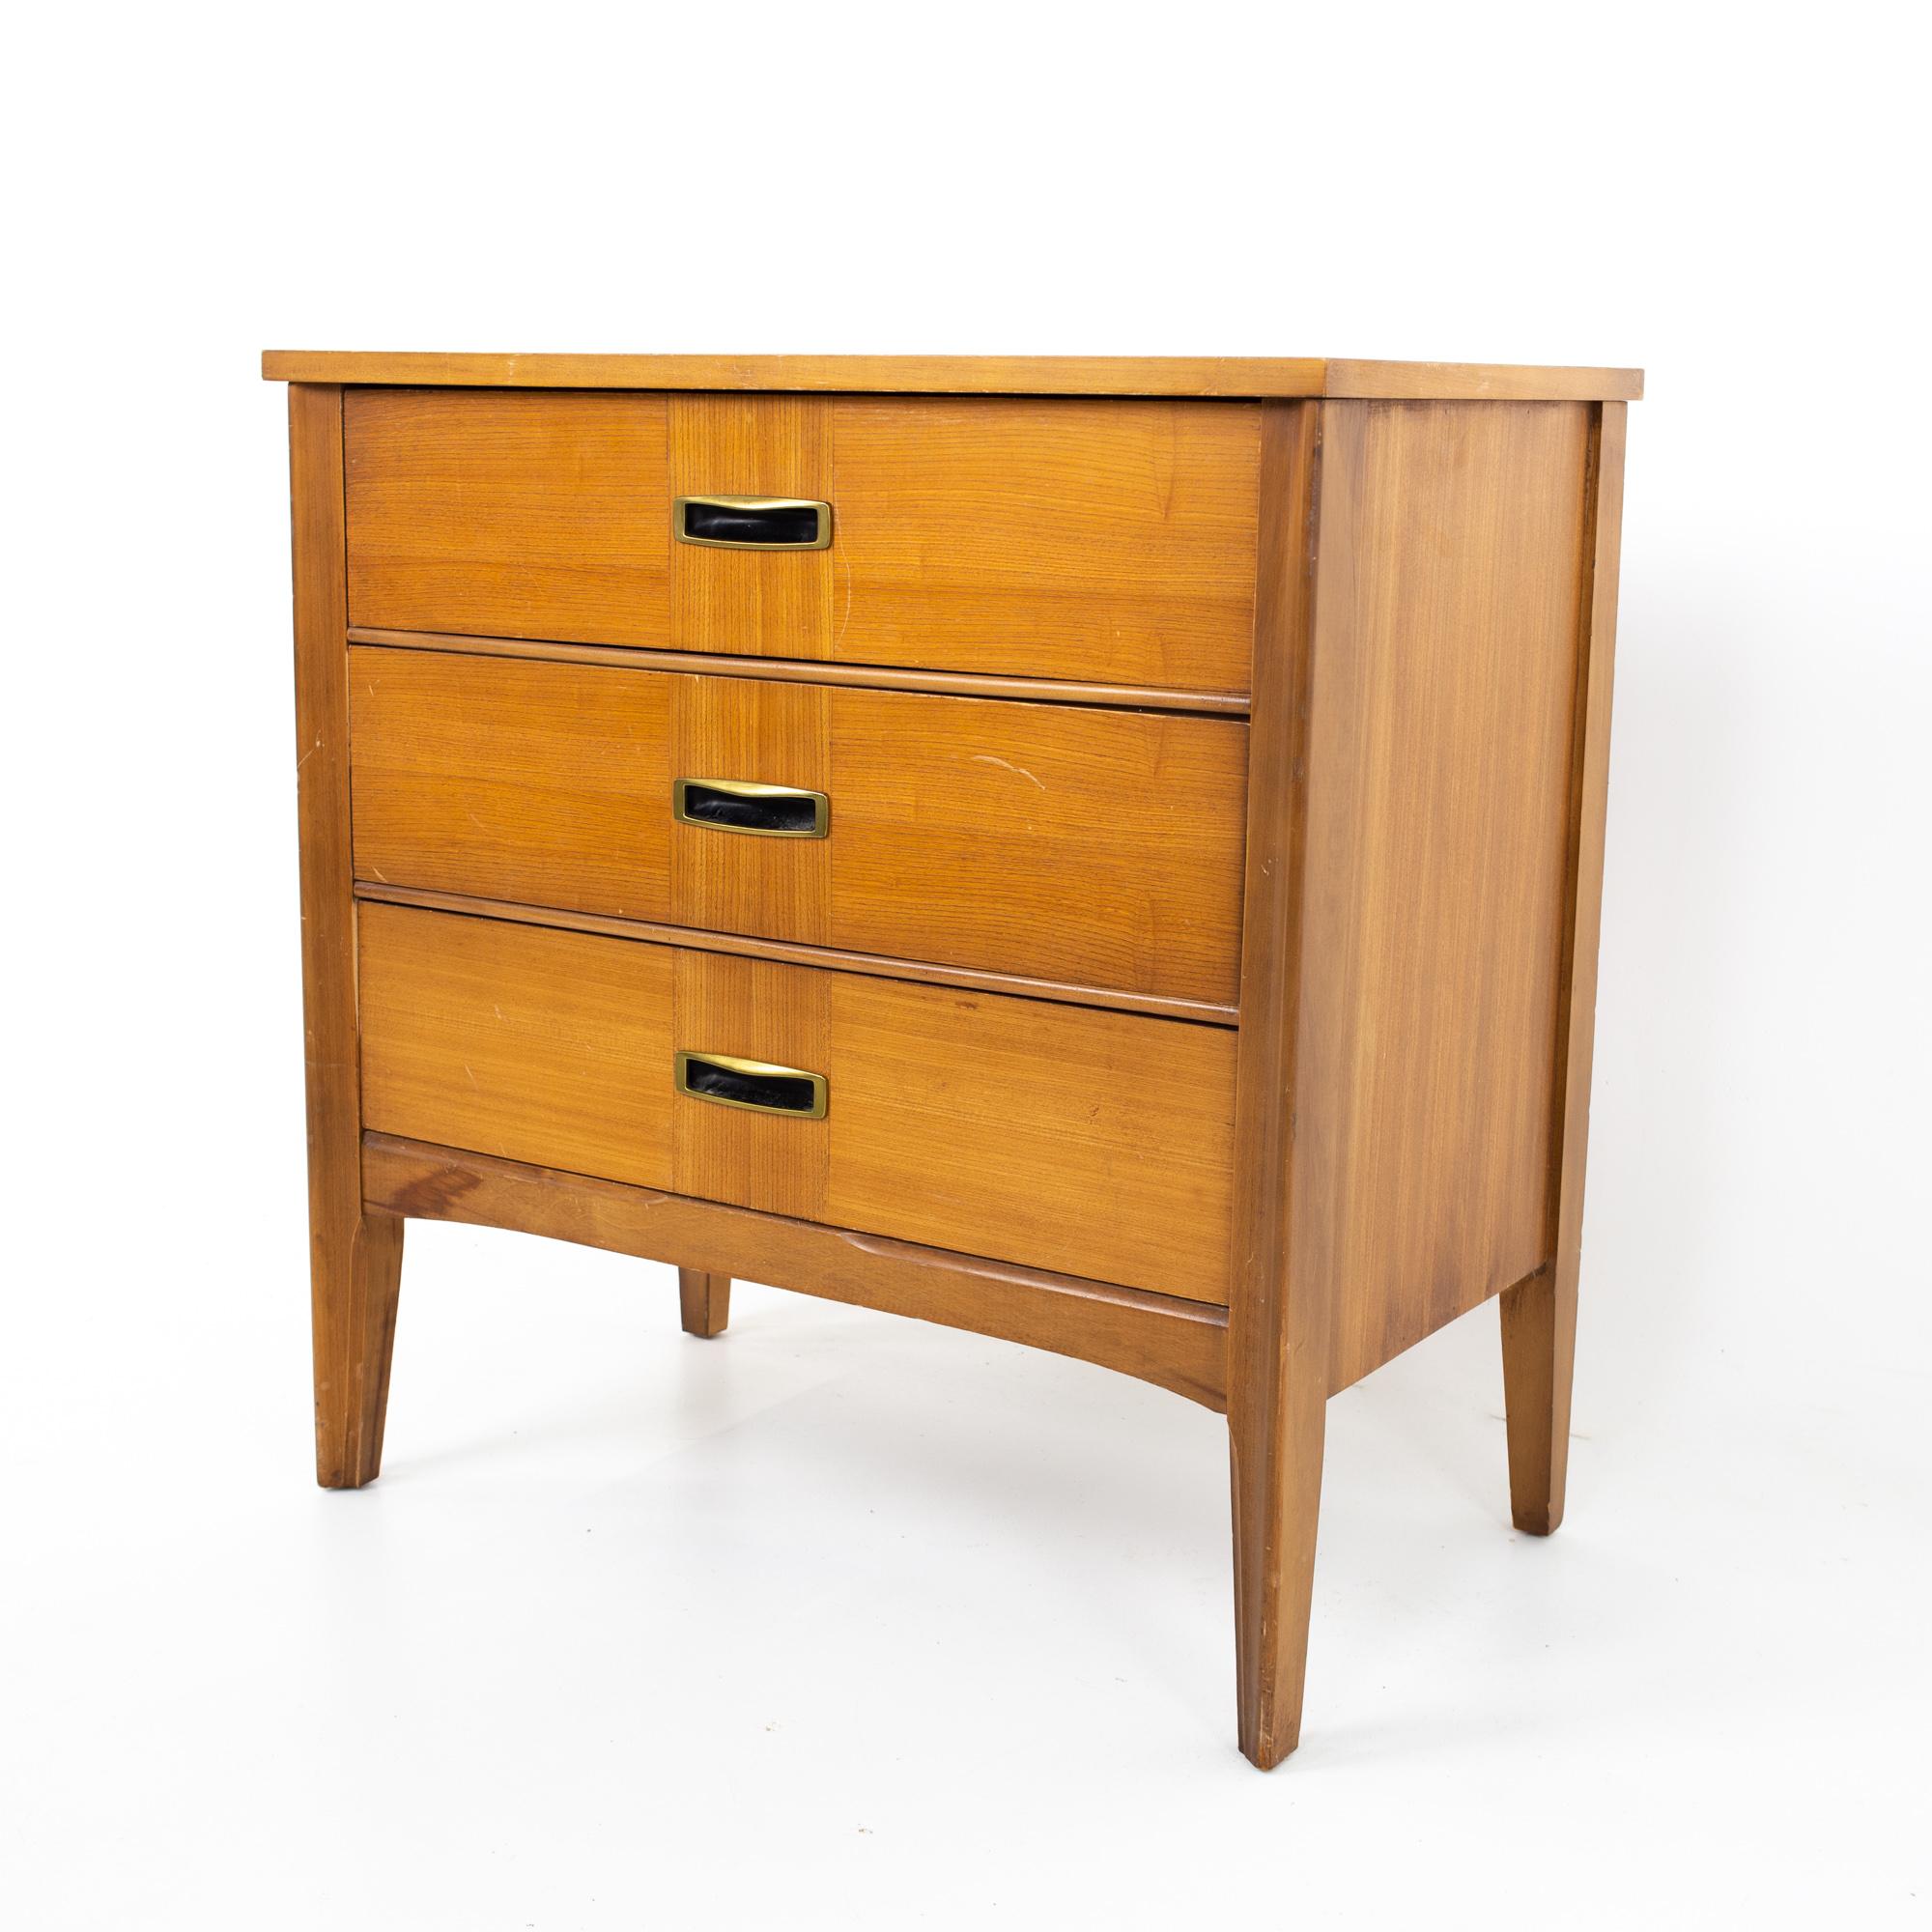 Mid century walnut and brass 3 drawer chest
Chest measures: 30.5 wide x 18 deep x 31 inches high

All pieces of furniture can be had in what we call restored vintage condition. That means the piece is restored upon purchase so it’s free of